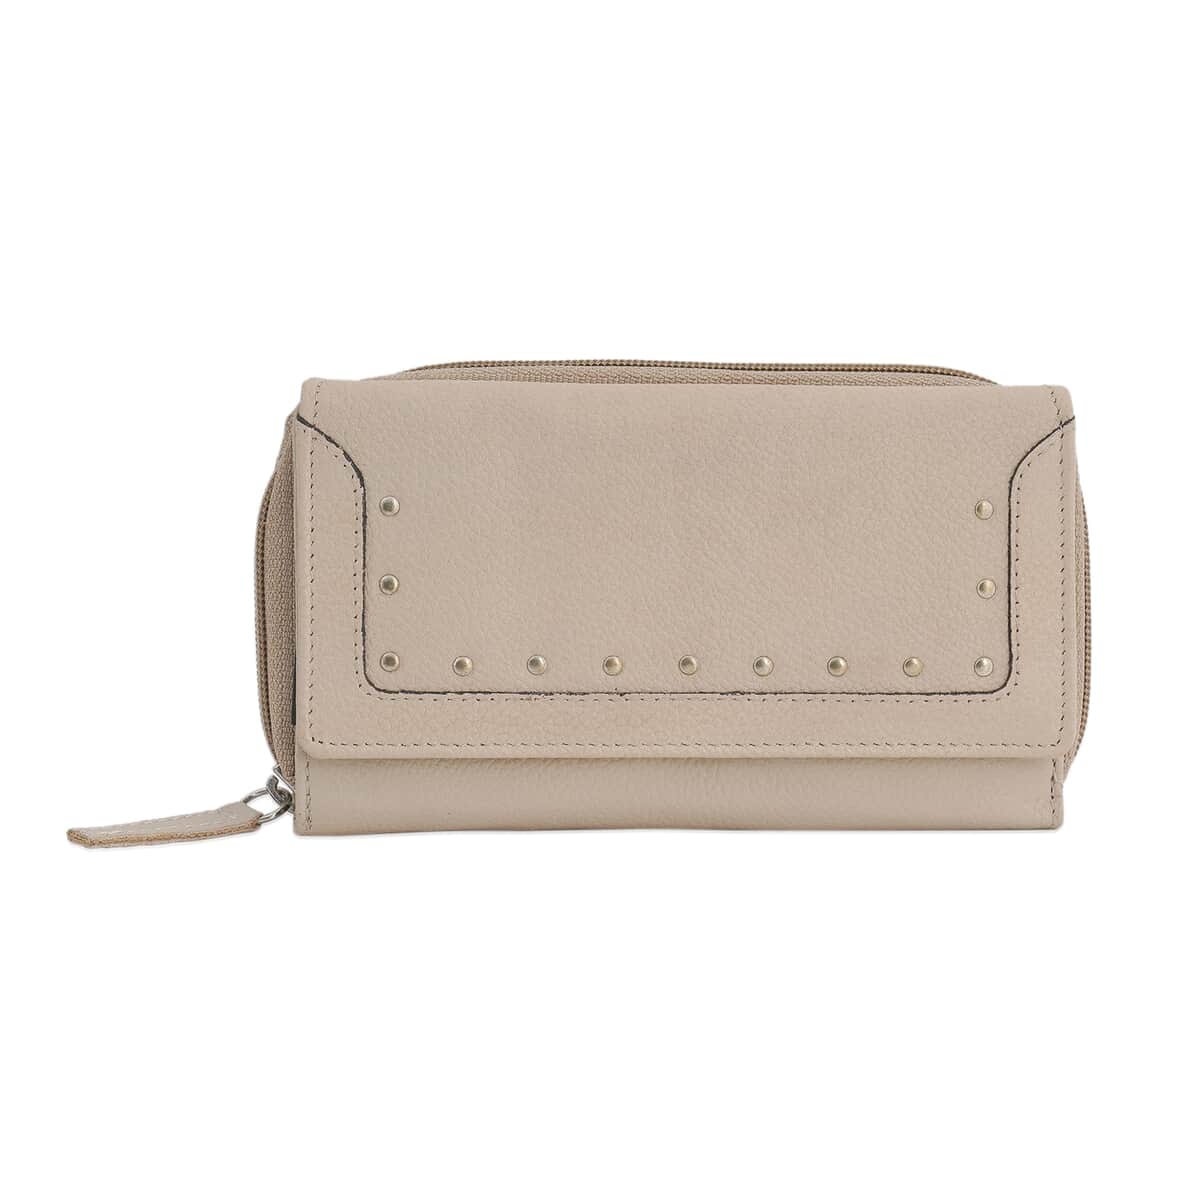 Presidential Deal Union Code Soft Beige Genuine Leather RFID Women's Wallet (7.67"x1.18"x4.13") image number 0